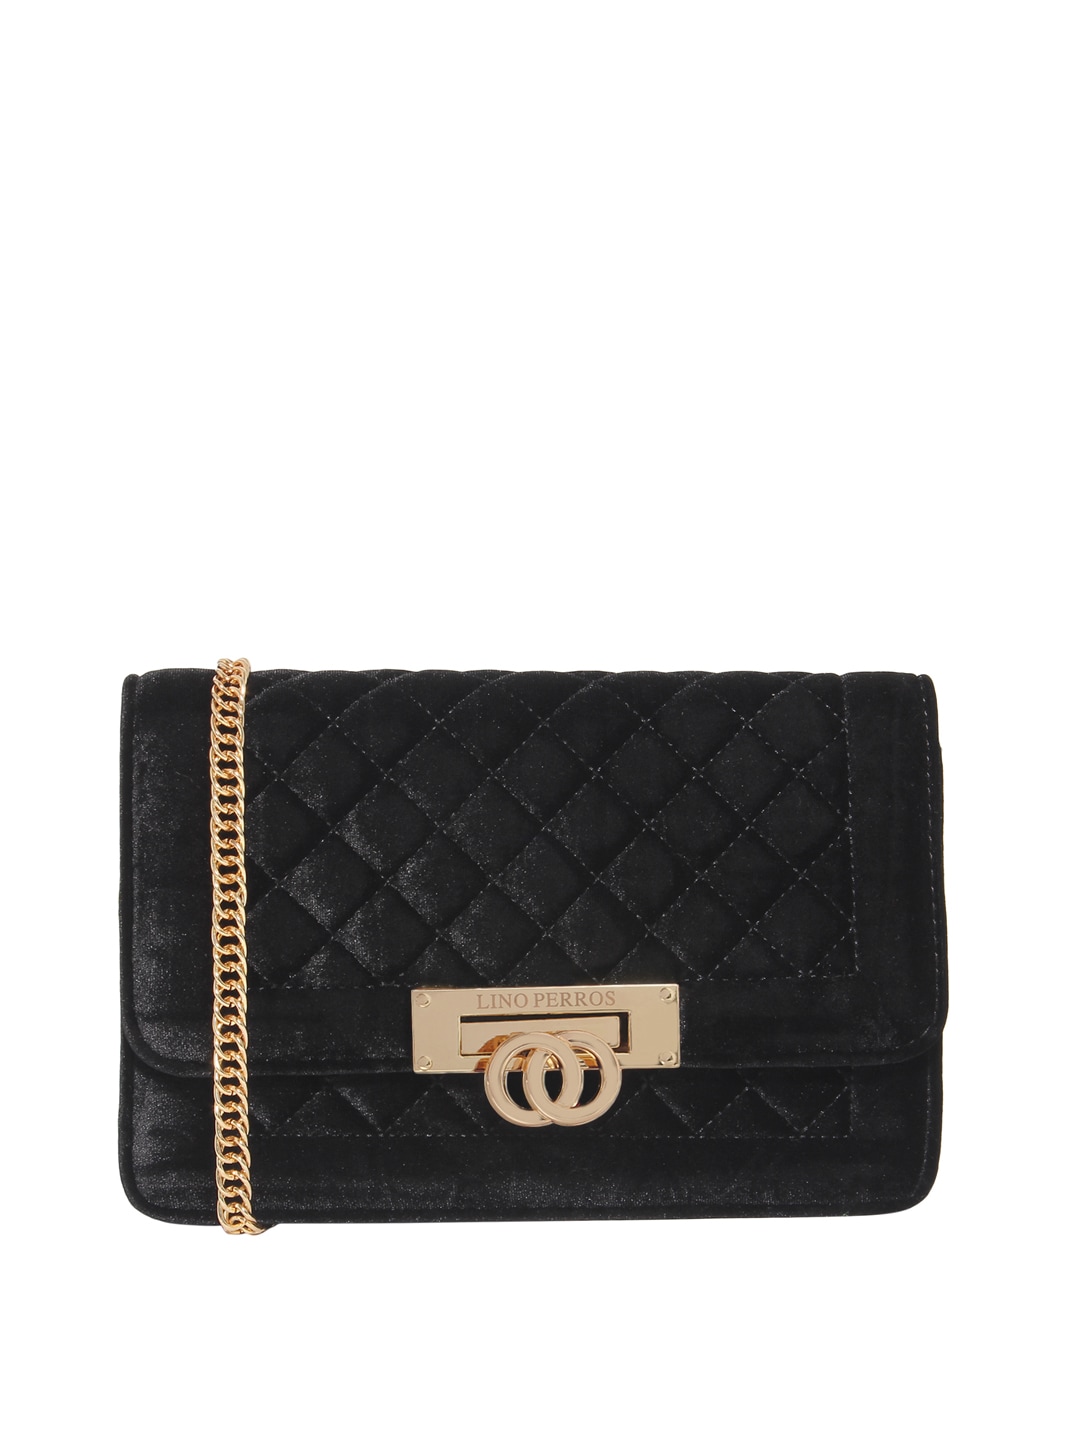 Lino Perros Black Quilted Sling Bag with Velvet Finish Price in India